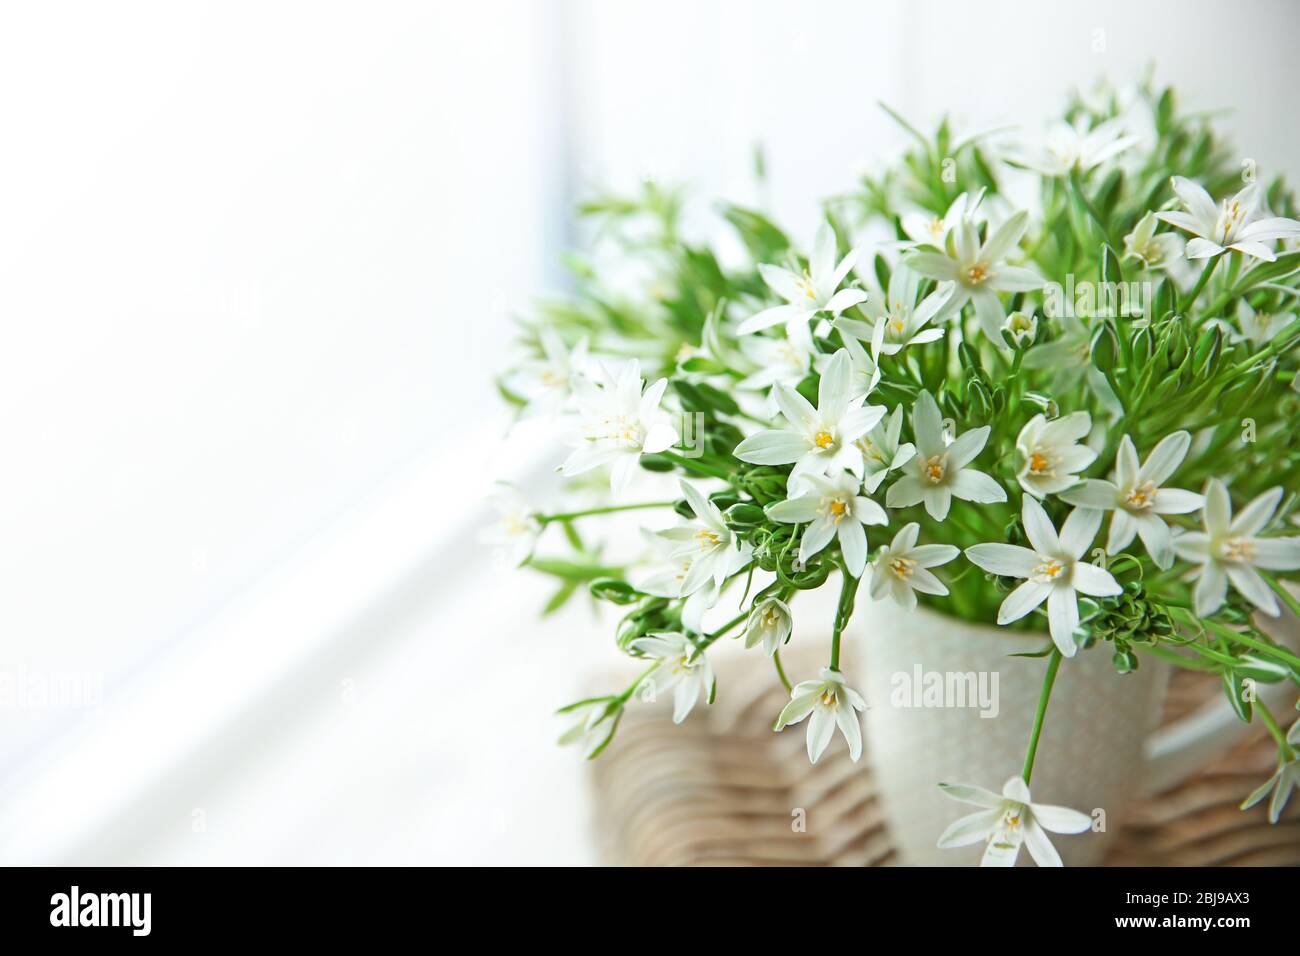 Bouquet of little white flowers on wicker furniture Stock Photo